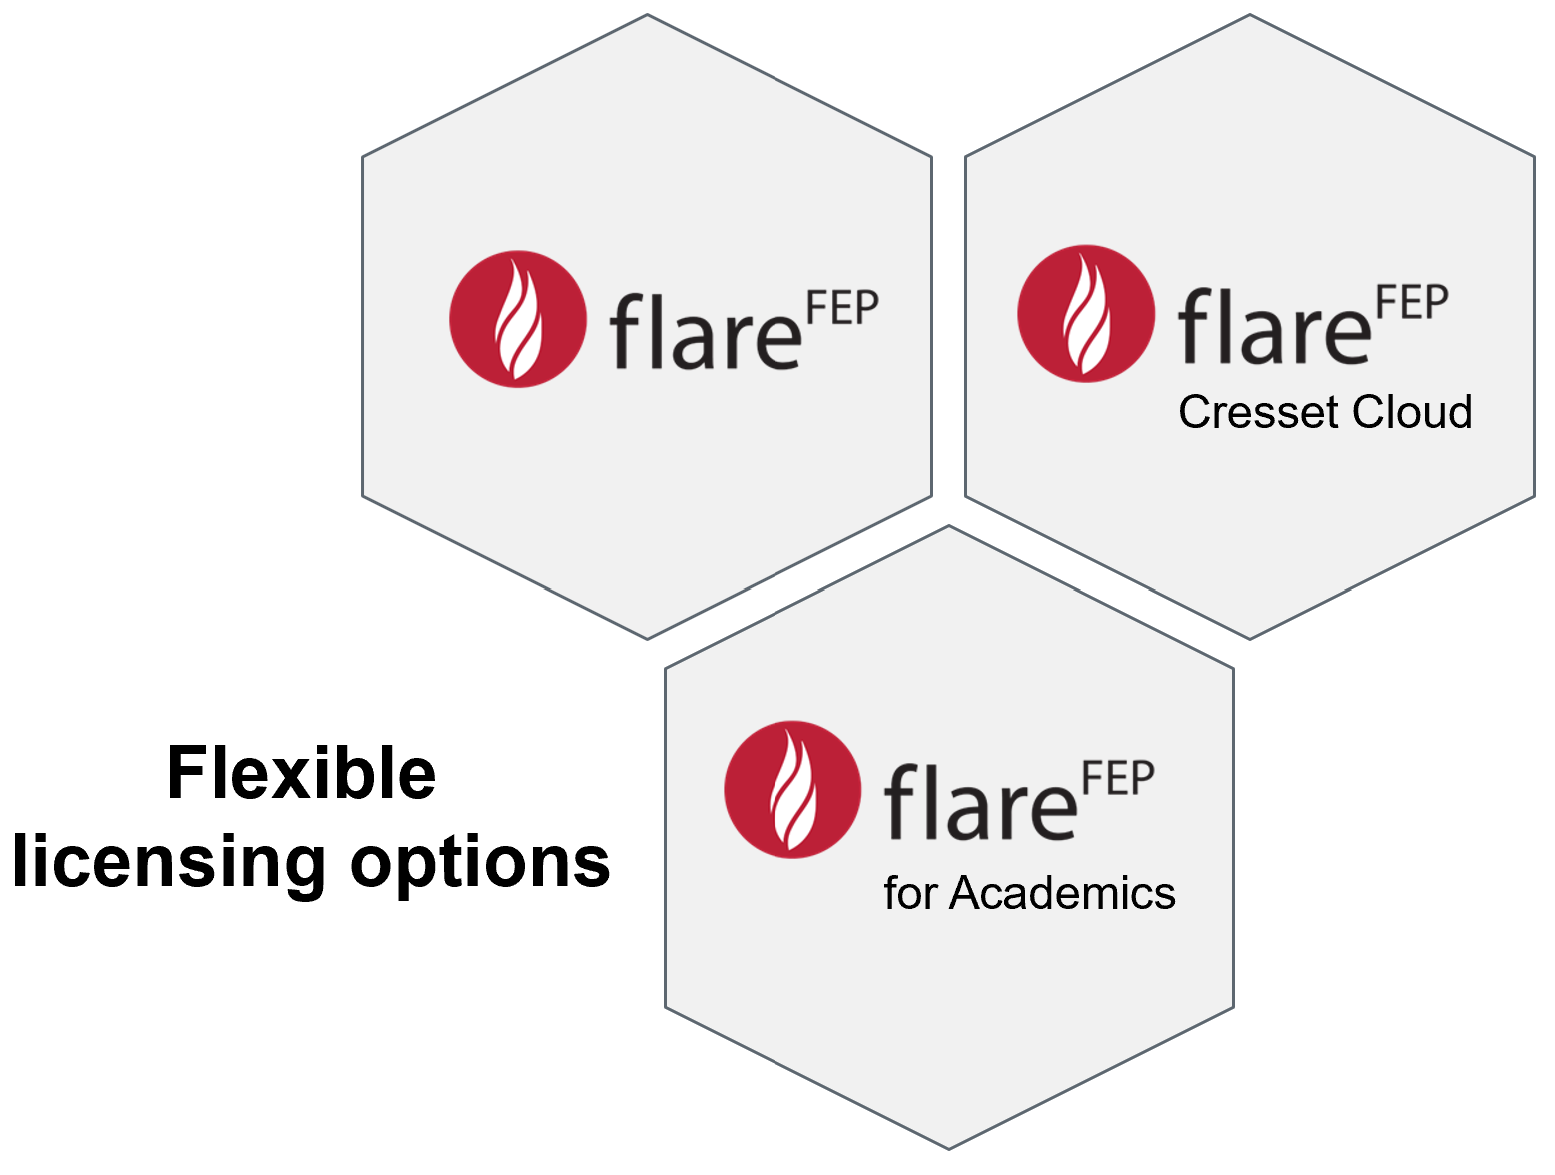 Flexible licencing options for Flare FEP